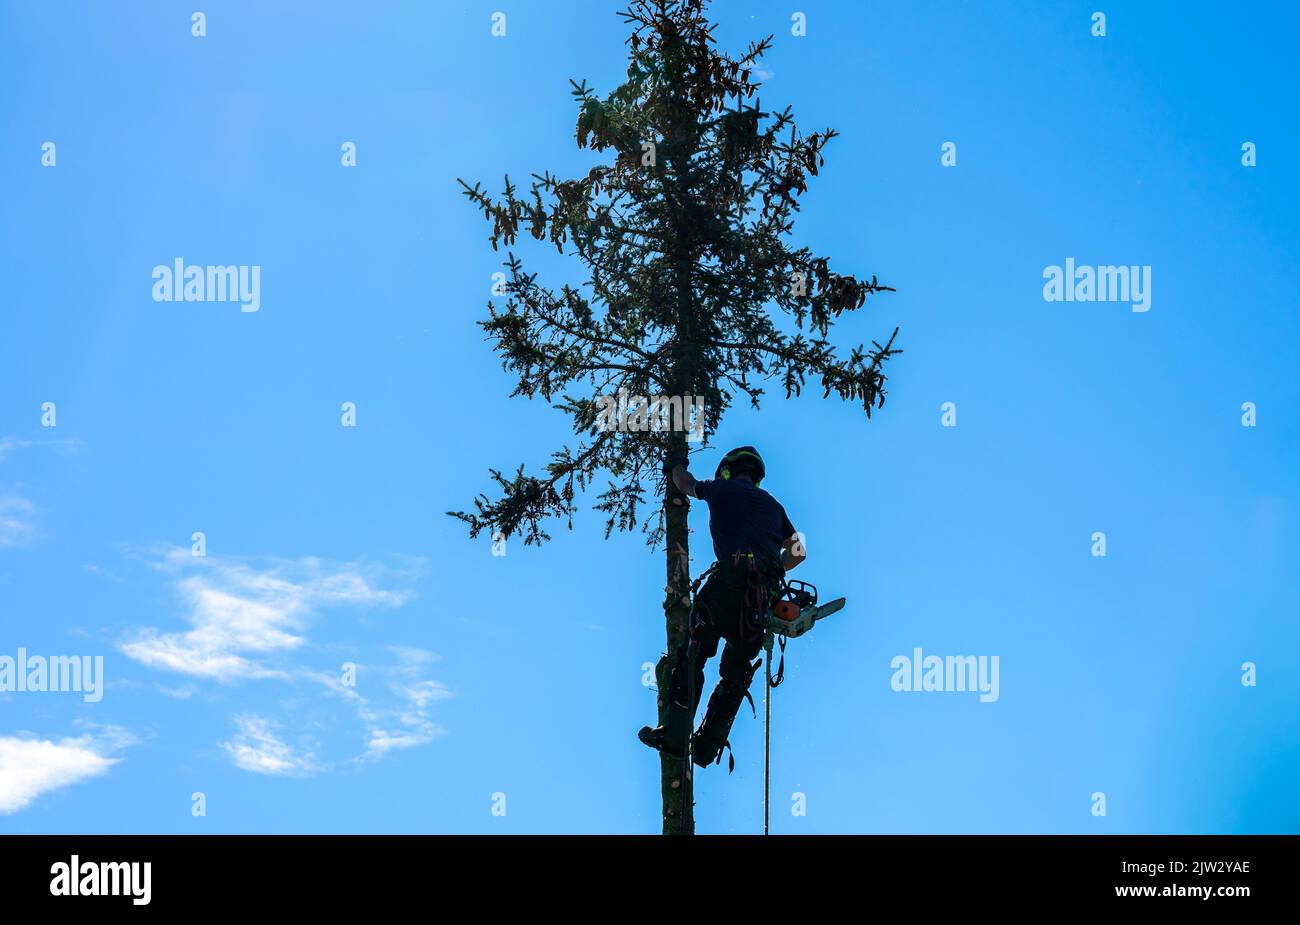 Lumberjack felling a tree with blue background Stock Photo